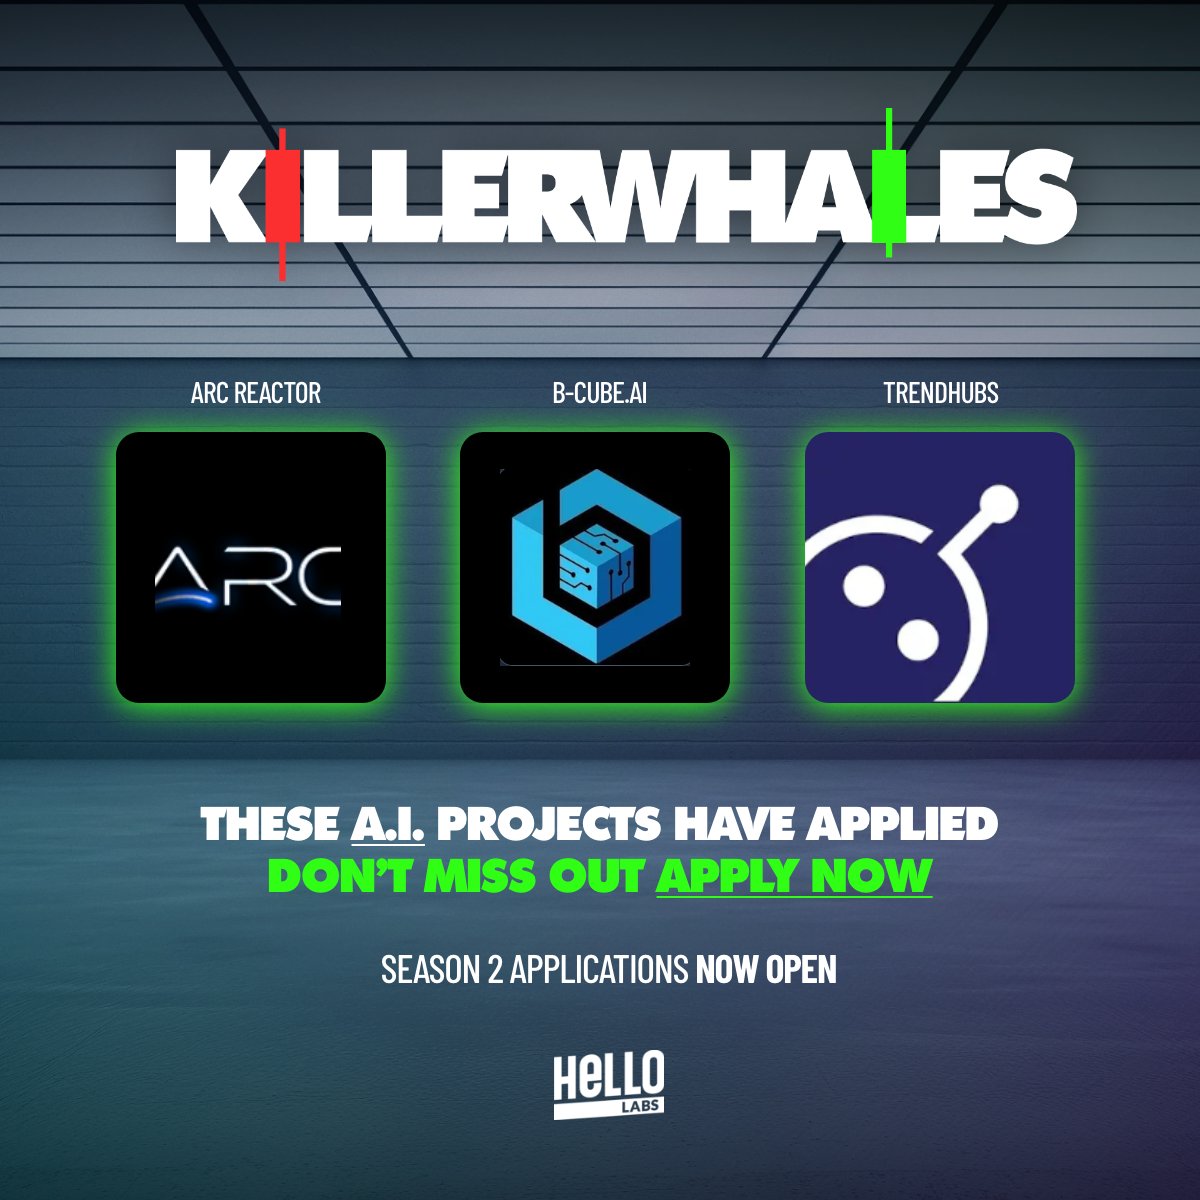 AI has become a hot narrative in web3 Here are a few projects that applied for season 2 of @KillerWhalesTV that are bridging the gap between AI and crypto 🔶@ARCreactorAI 🔶@Bcubeai 🔶@TrendHubsAI Which AI projects should also apply? Tag them below! 👇